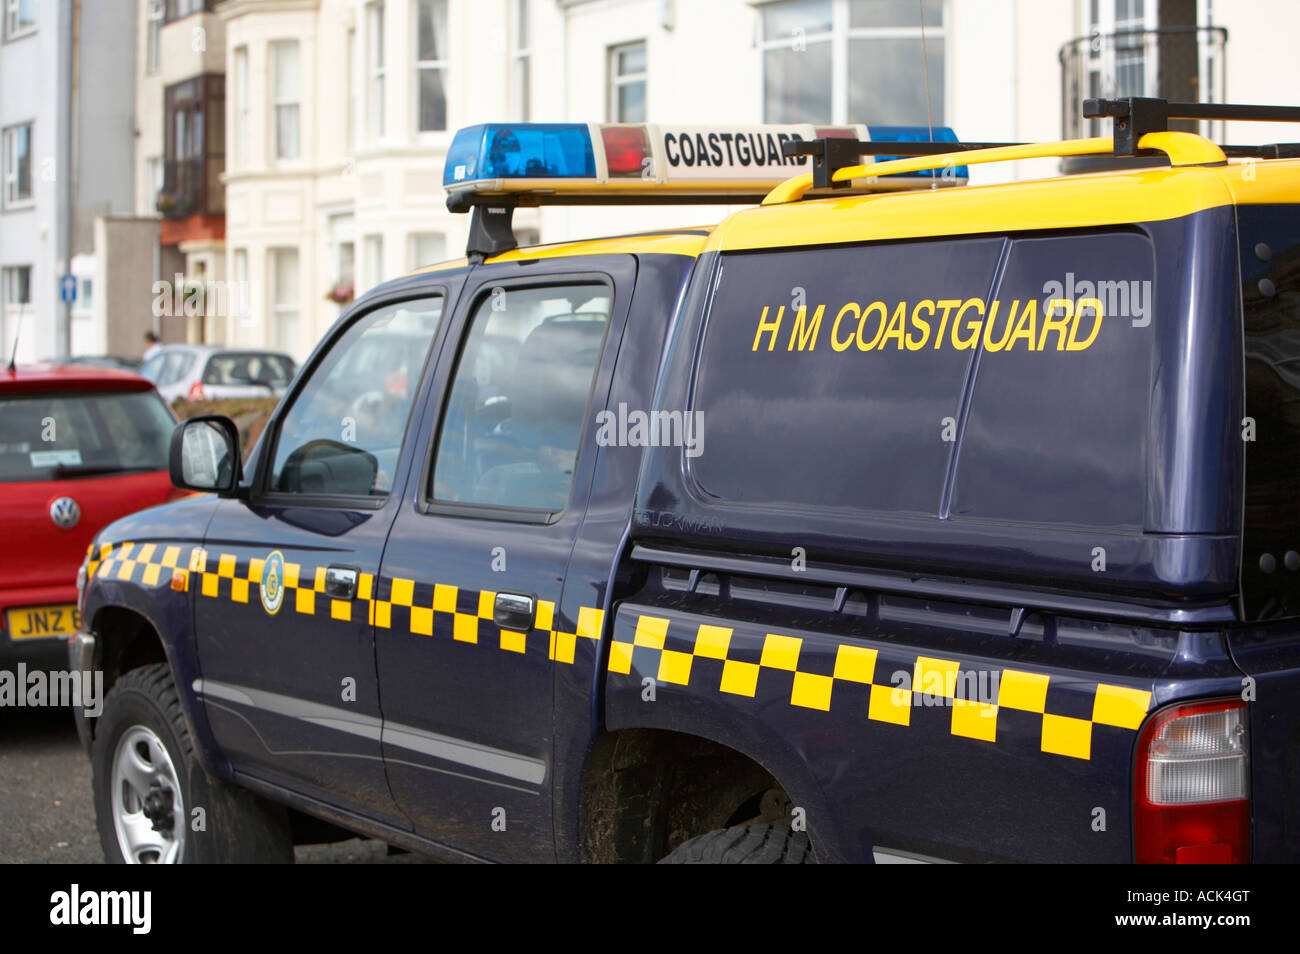 H M Coastguard blue and yellow rescue vehicle parked in Portrush harbour Stock Photo